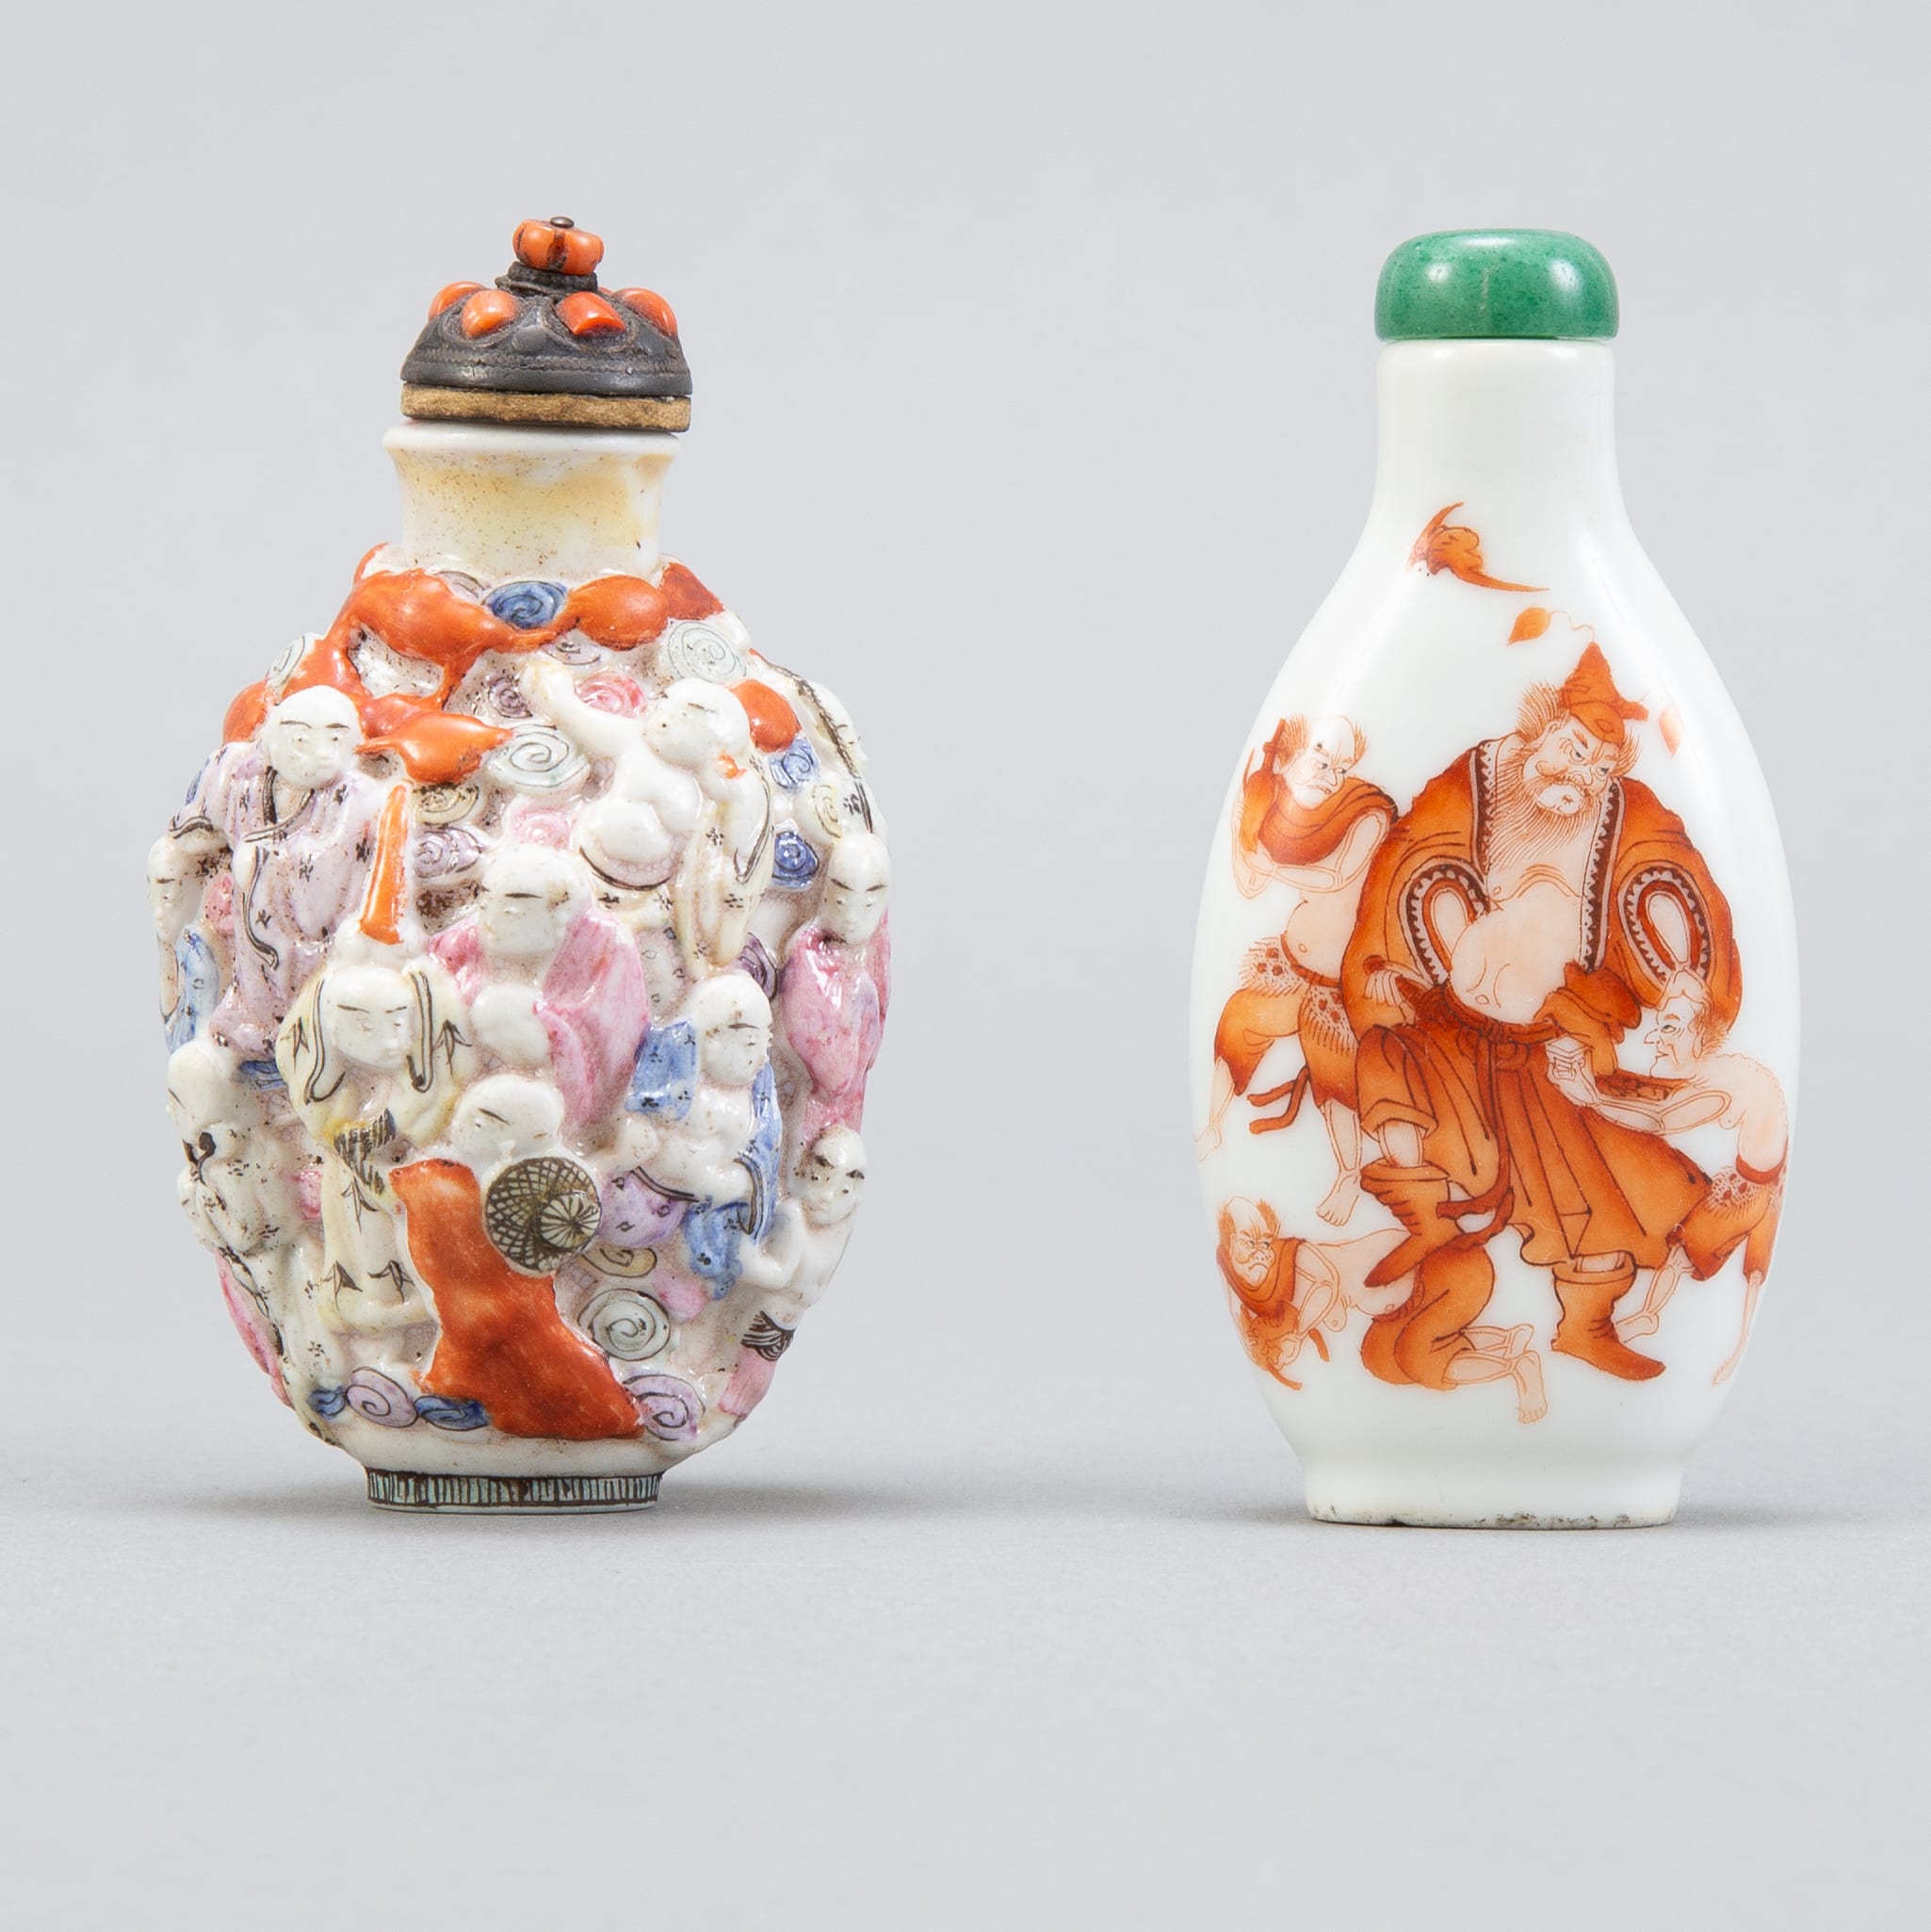 Lot 221: Grp:2 Chinese 19th c. Porcelain Snuff Bottles